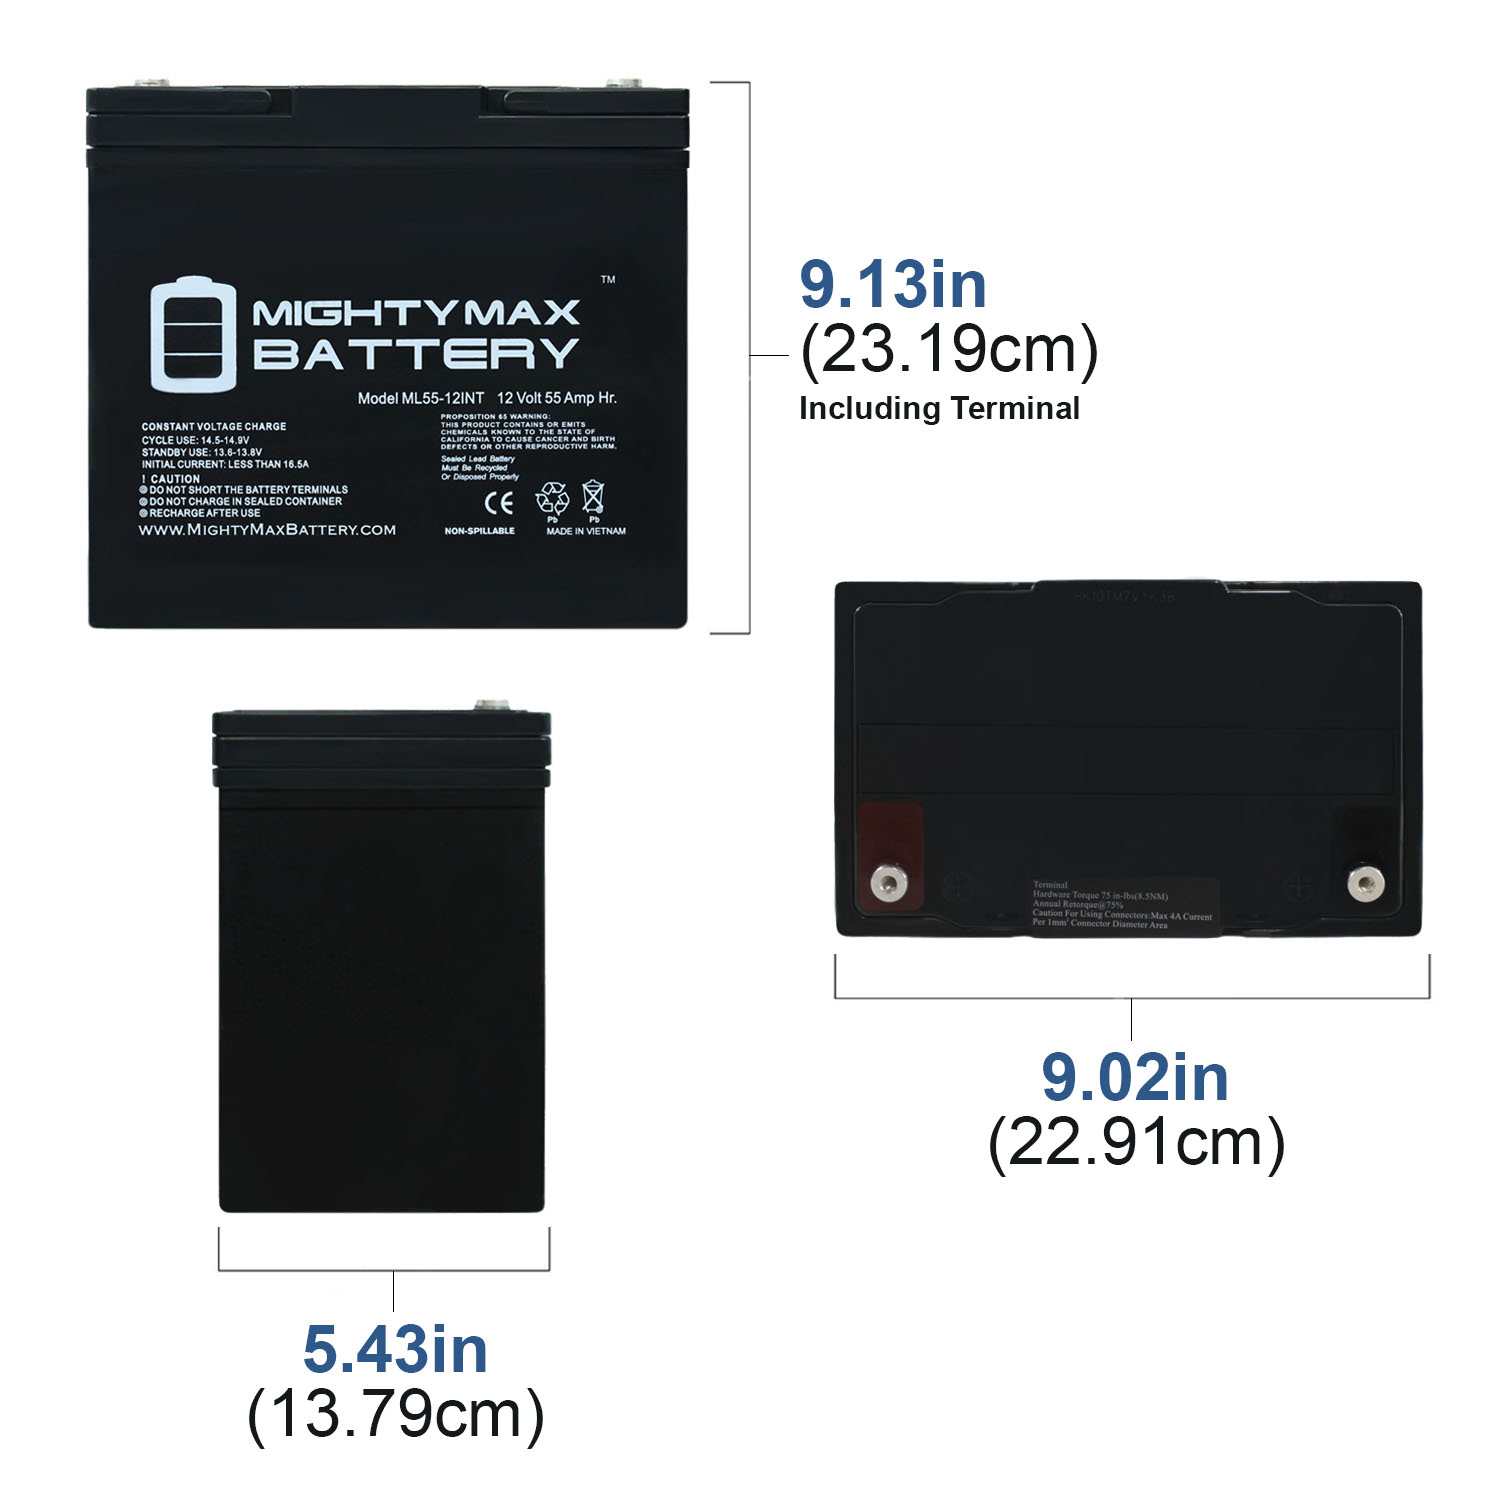 Mighty Max Battery - 12V 55Ah Internal Thread Battery for Invacare 3G Storm Series Arrow - ML55-12INT179